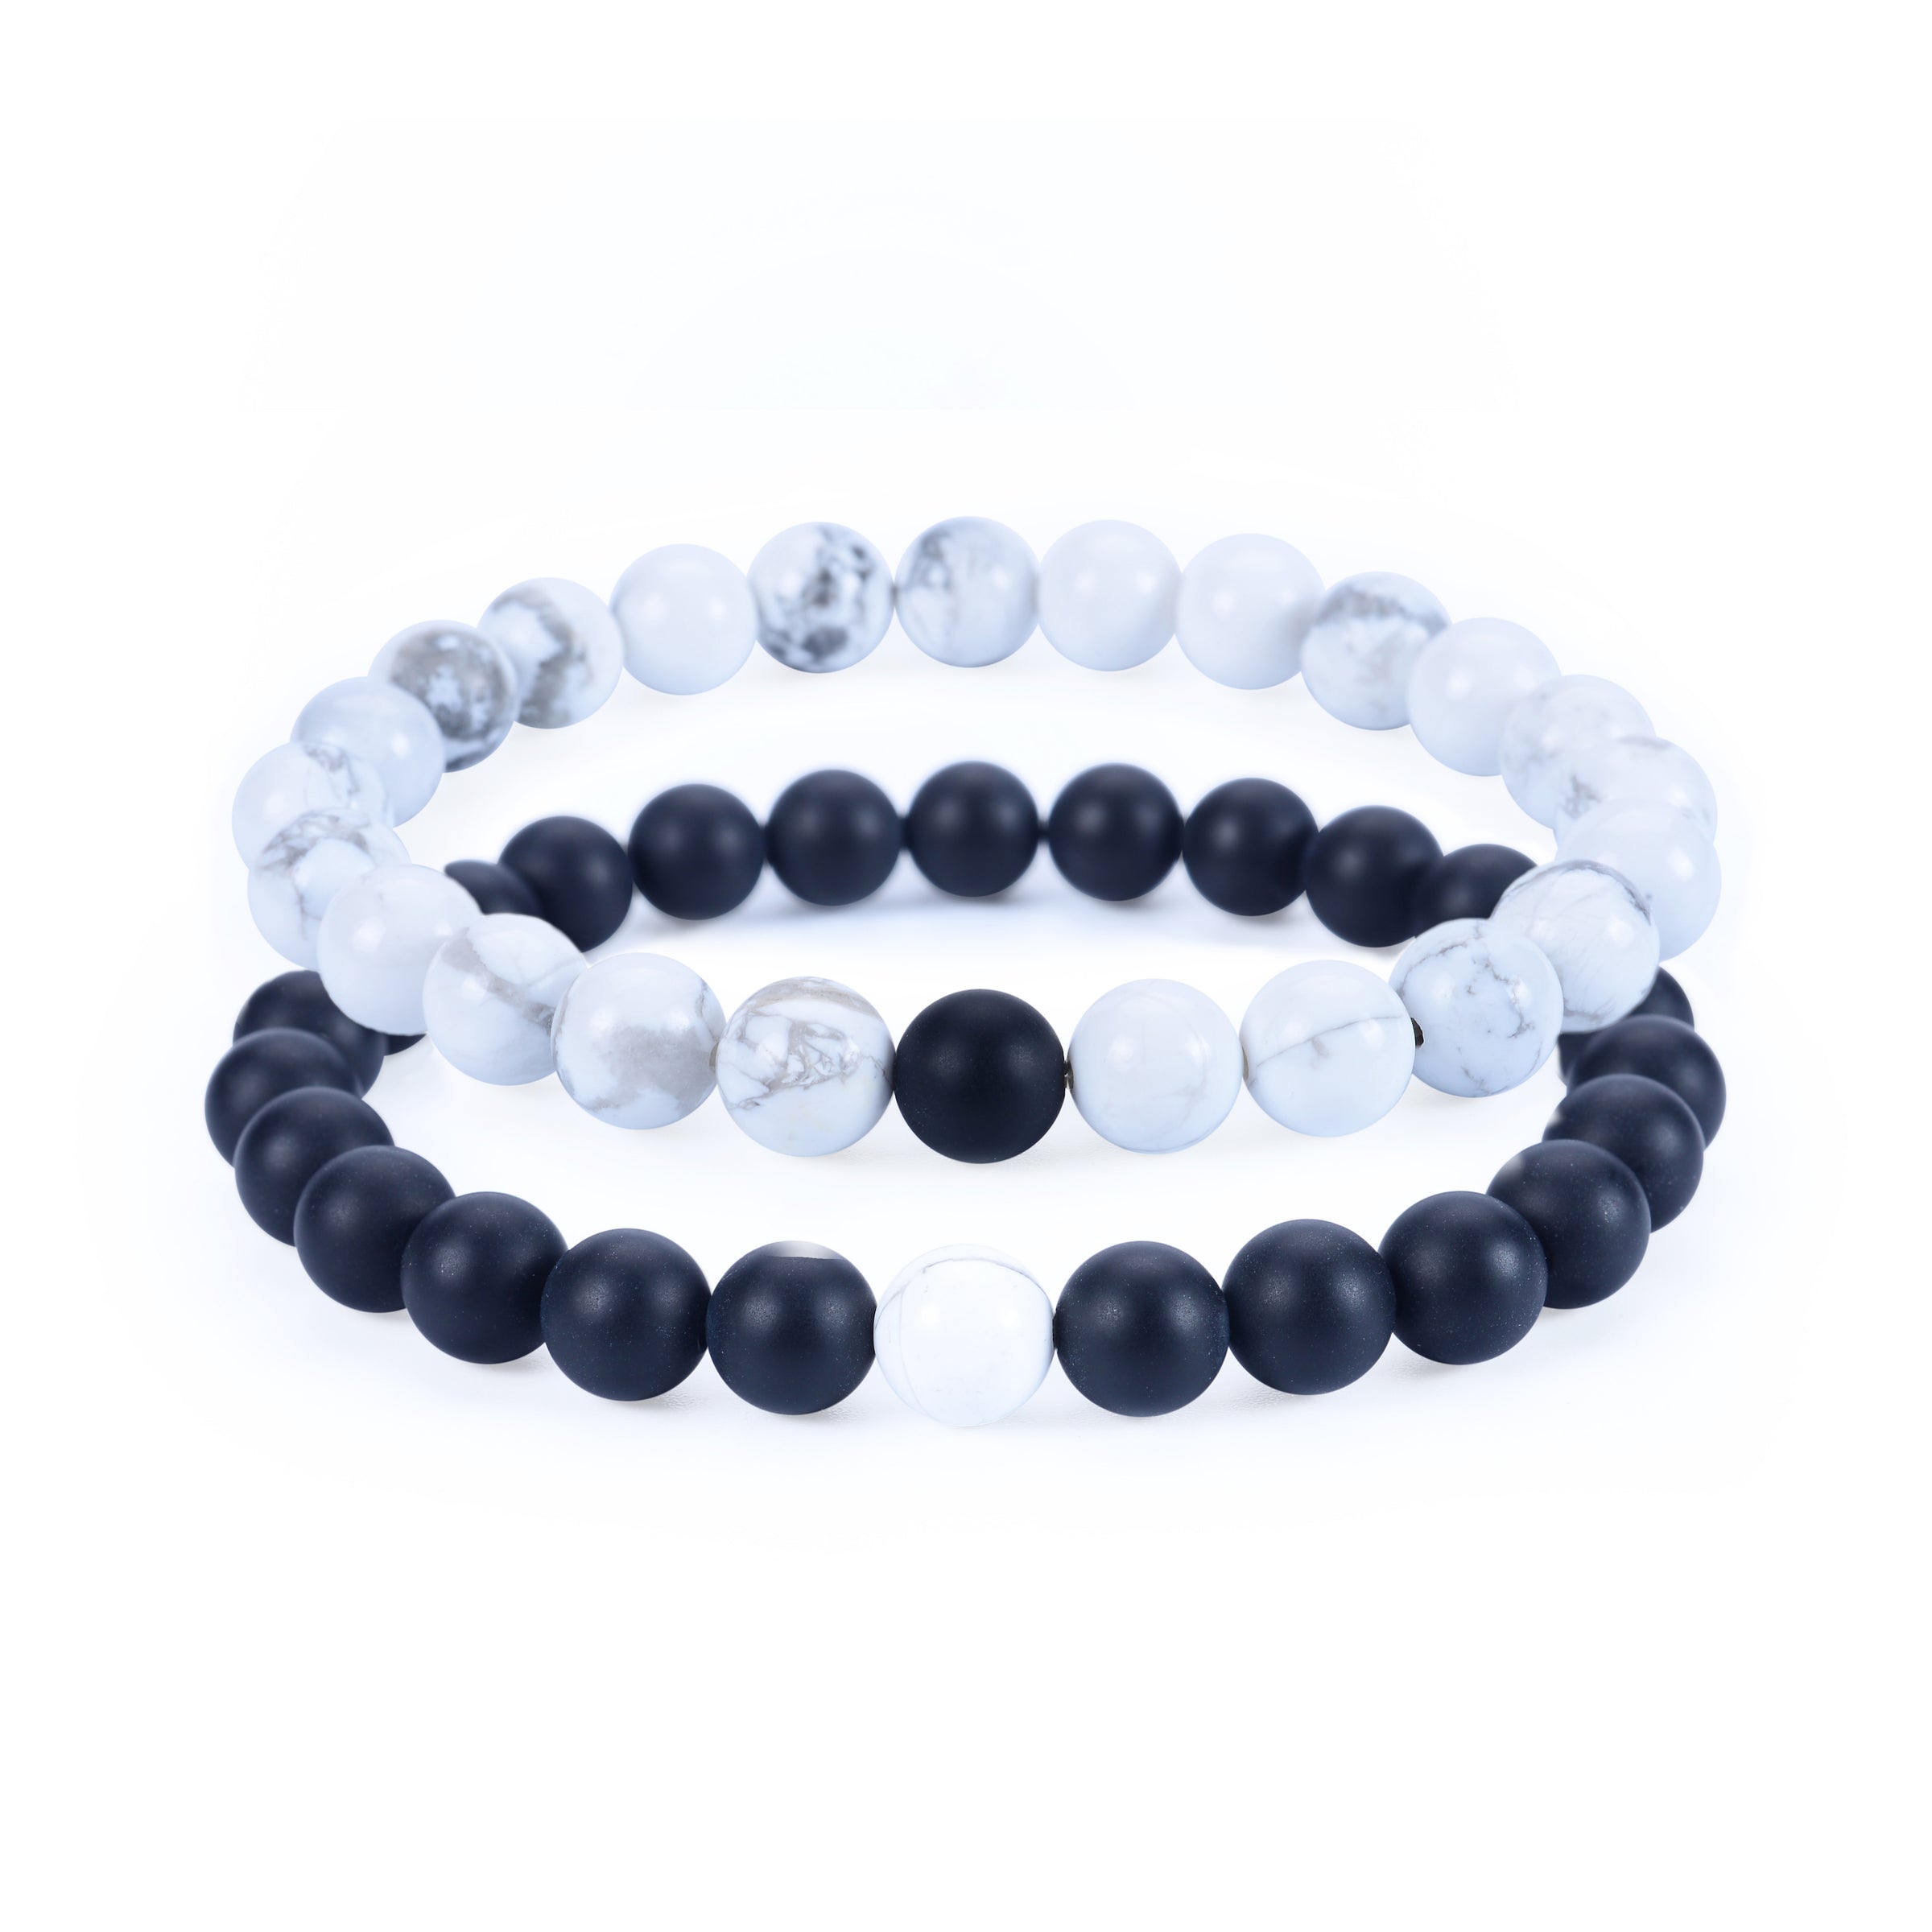 Couples Distance Stretch Bracelets | 8mm Beads (Matte Black Agate and White Howlite)